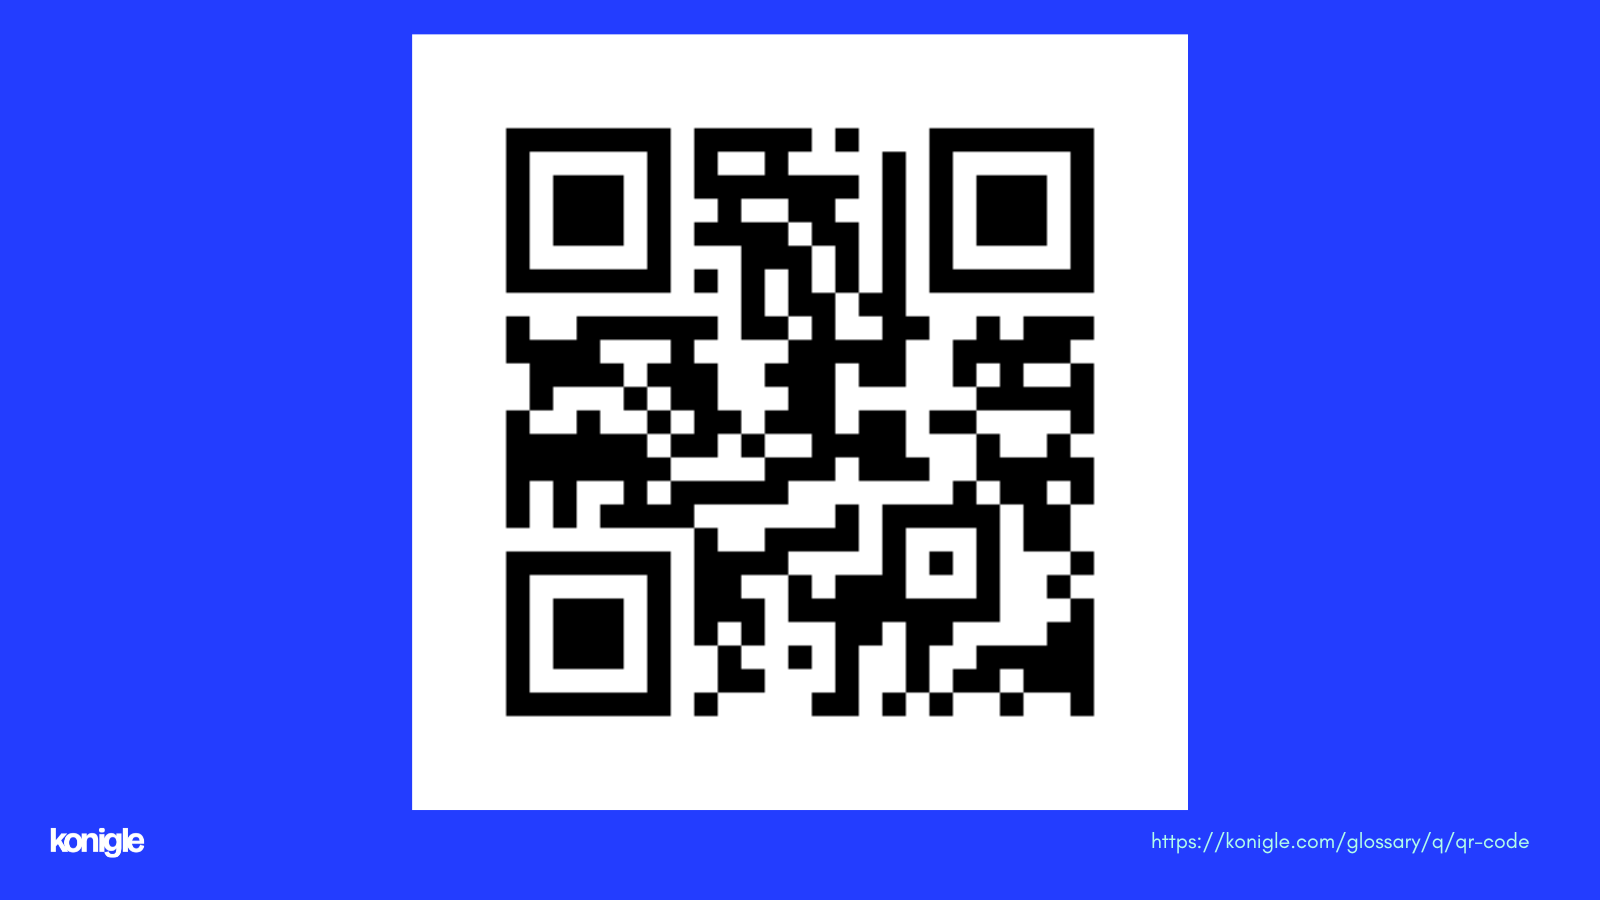 To display a generated QR code, you can use Konigle's QR code generator tool.